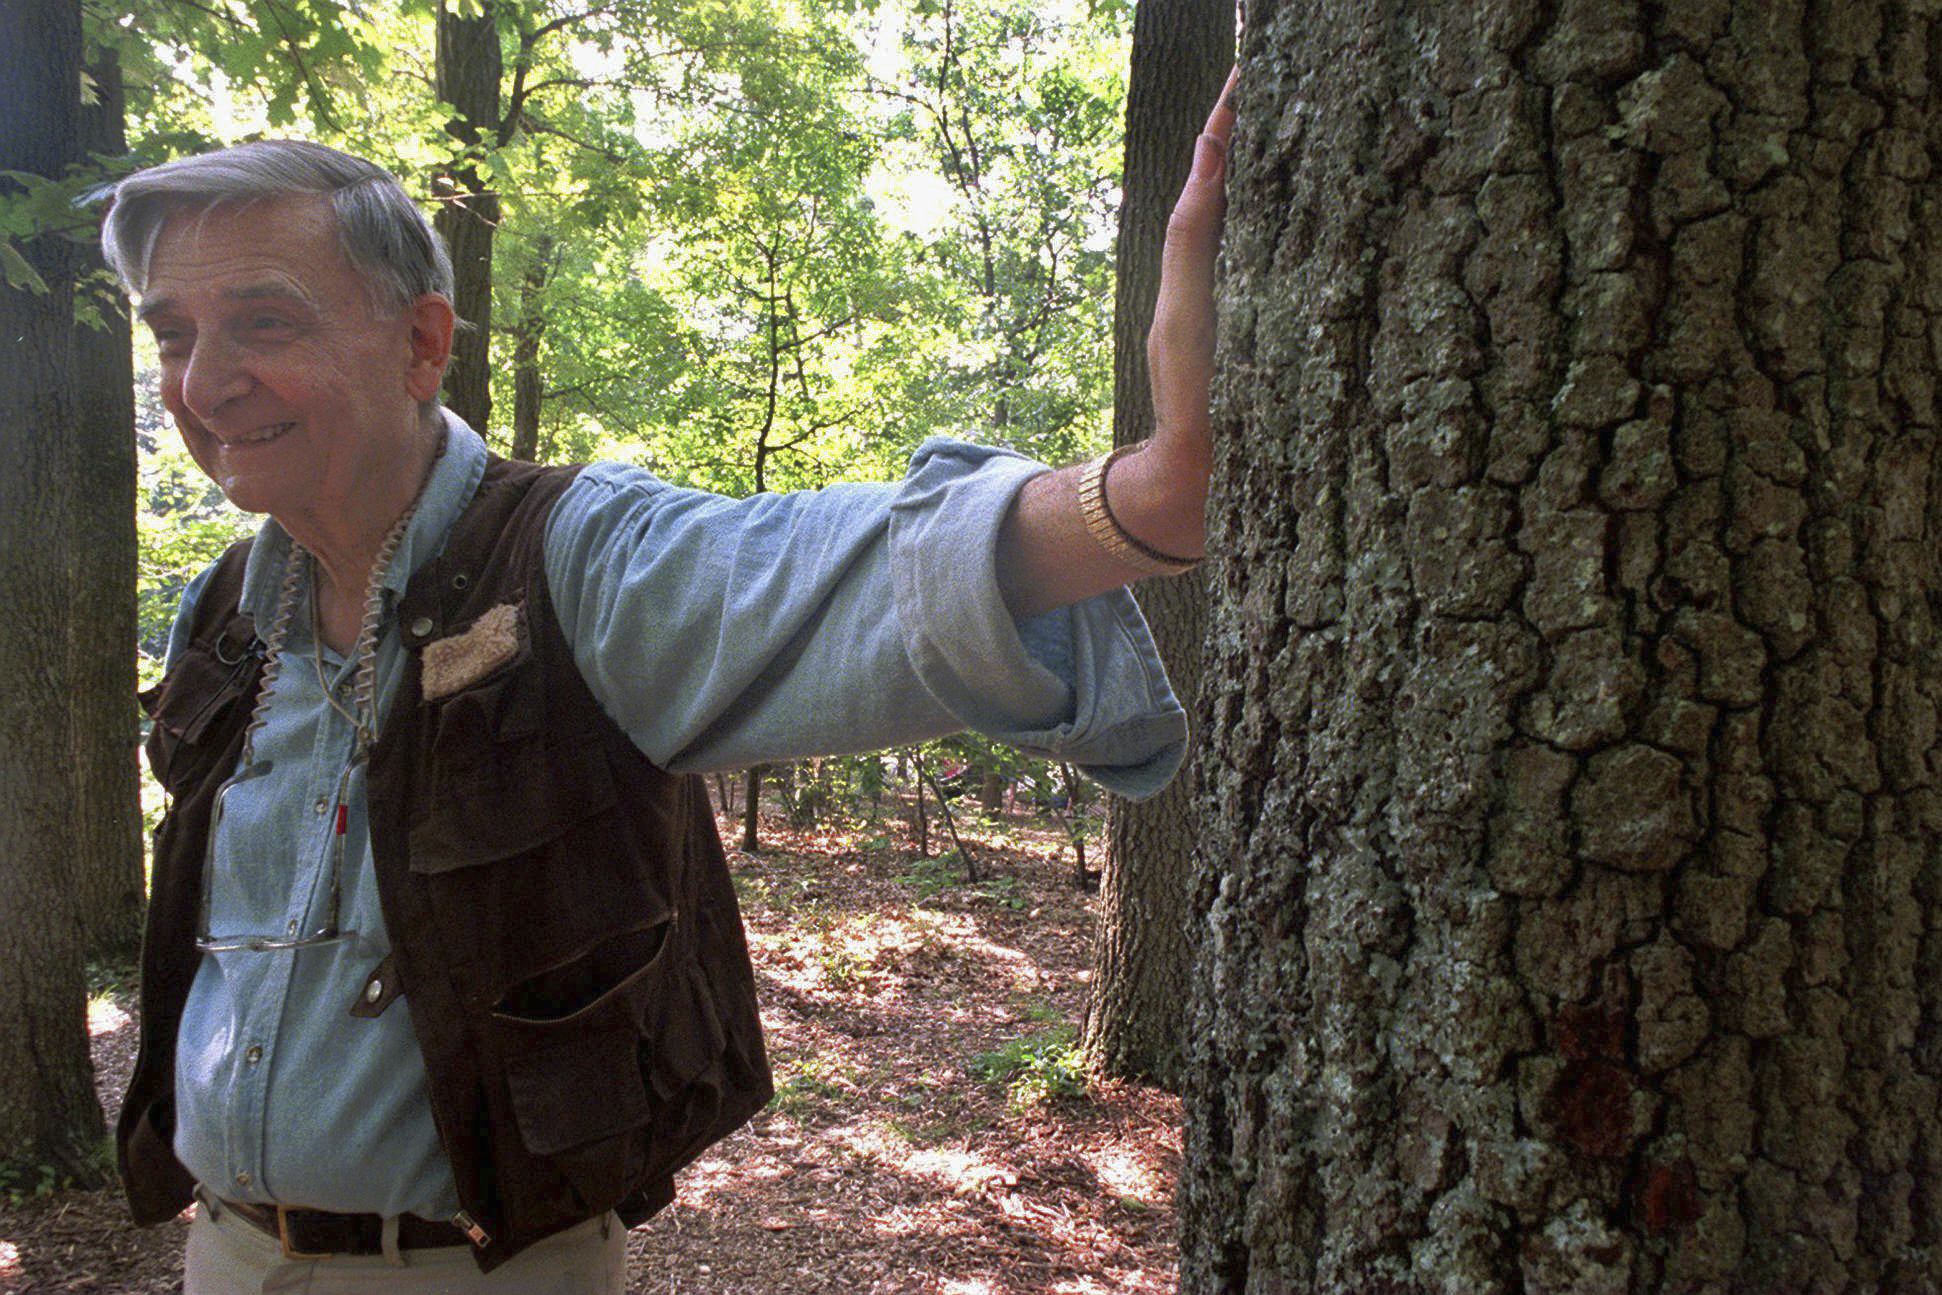 Biologist Edward O Wilson poses by tree